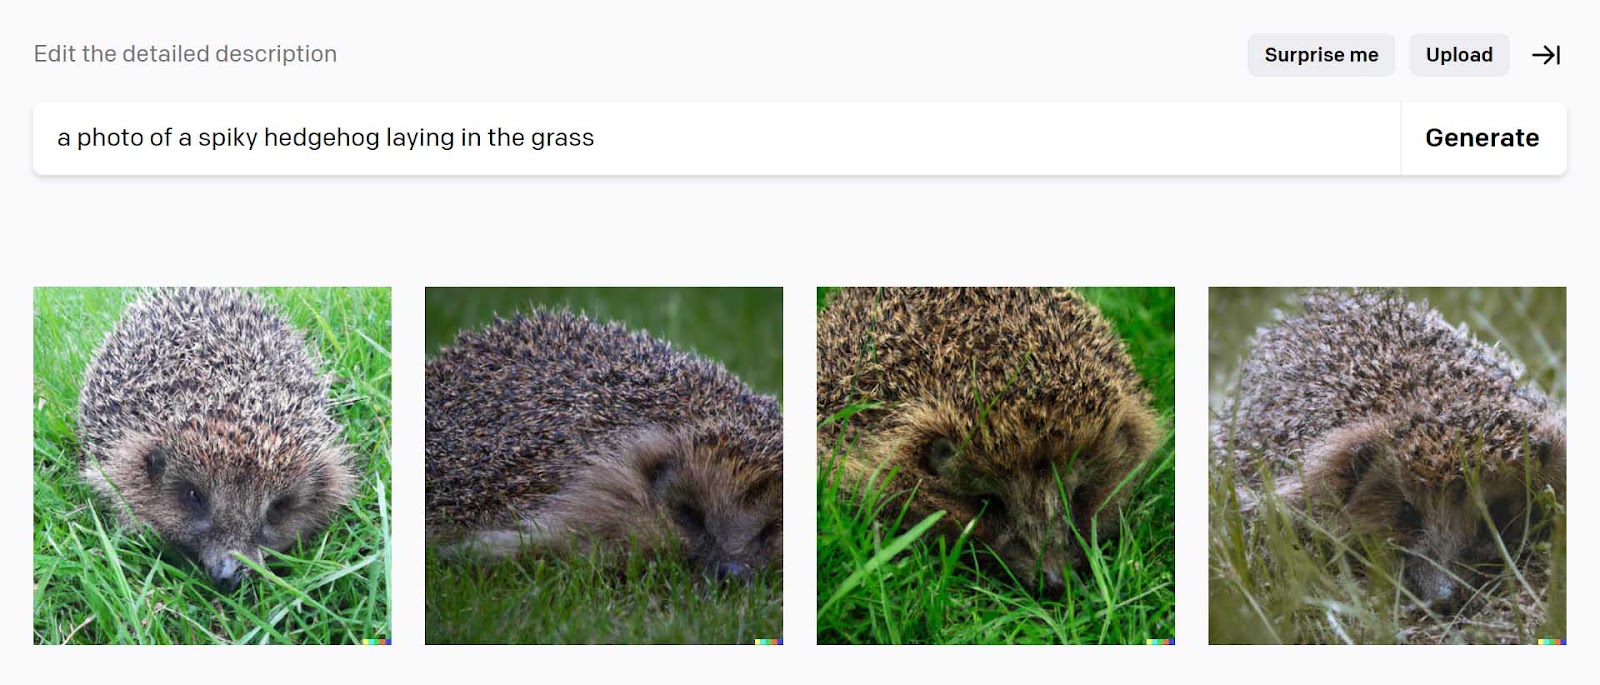 DALL-E 2's generated images for the “a photo of a spiky hedgehog laying in the grass” prompt